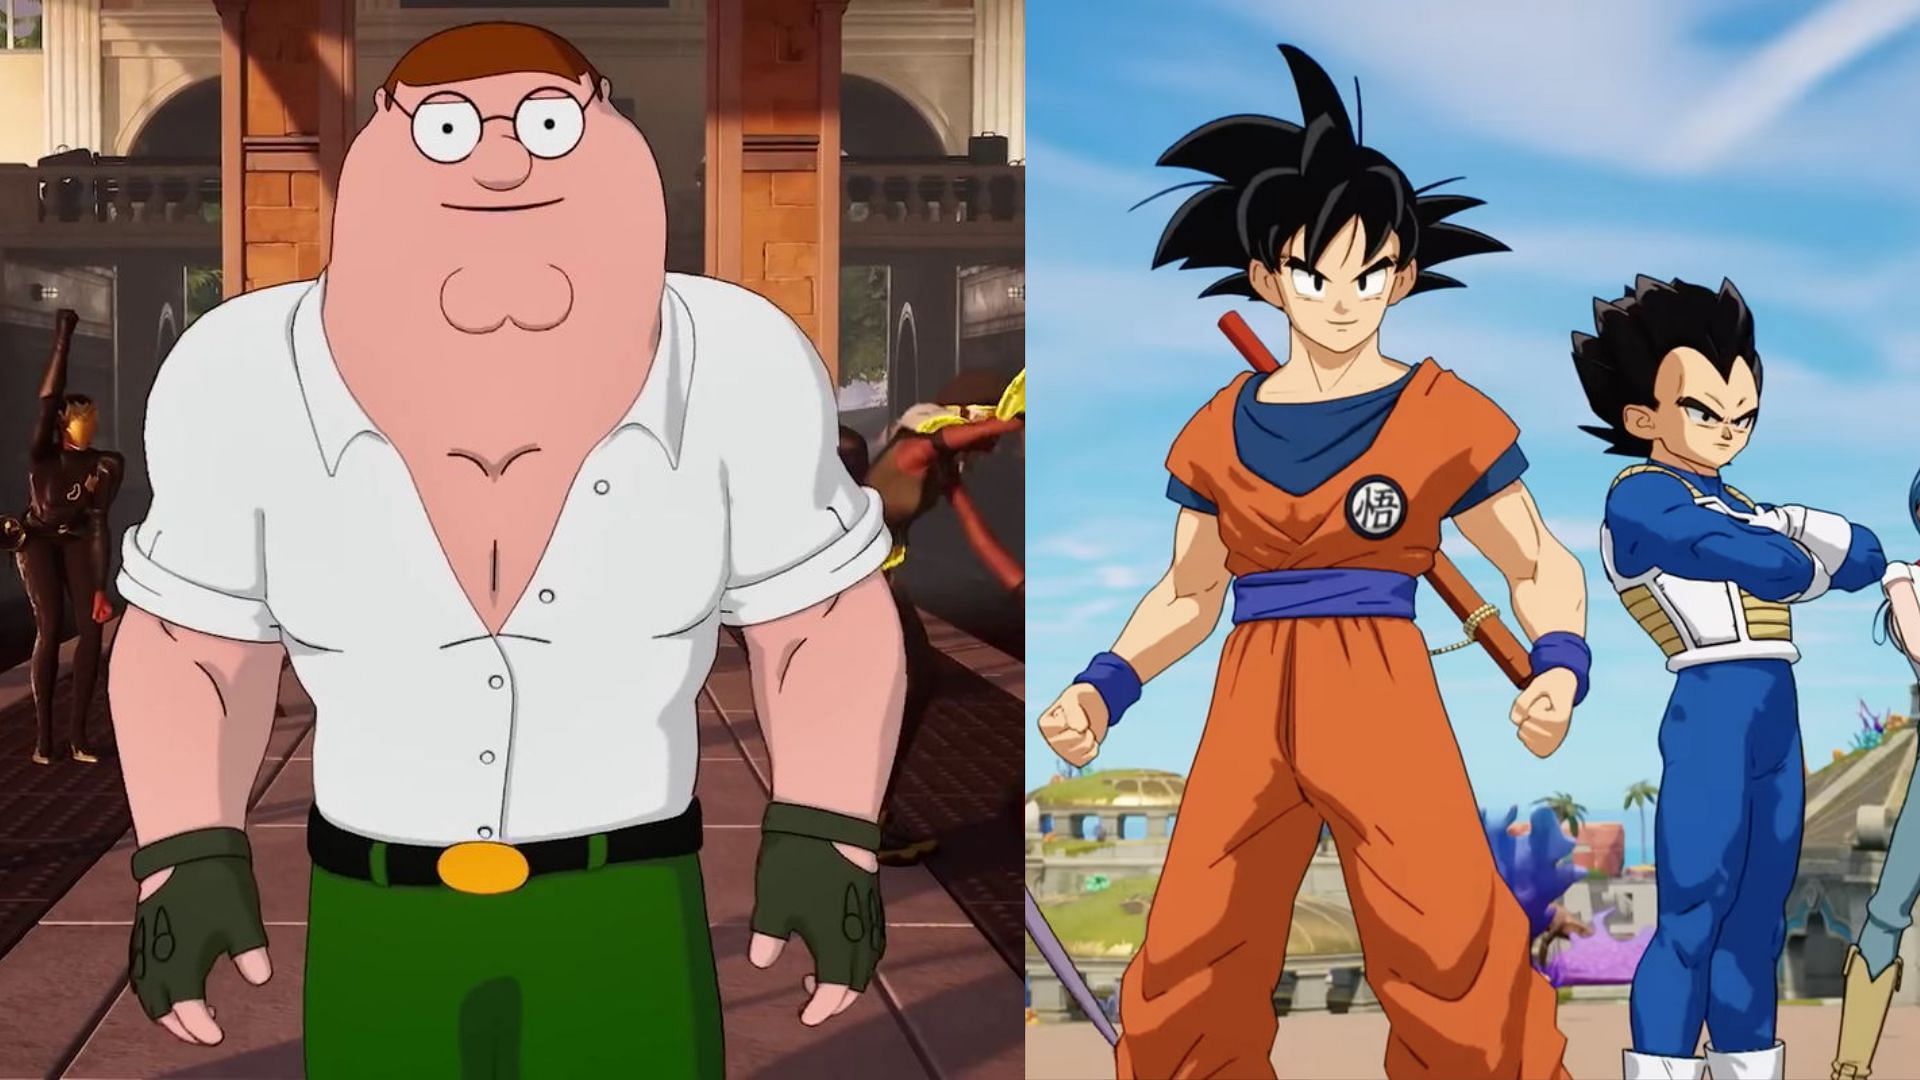 Fortnite community upset that Peter Griffin is more buff than Goku, makes no sense canonically